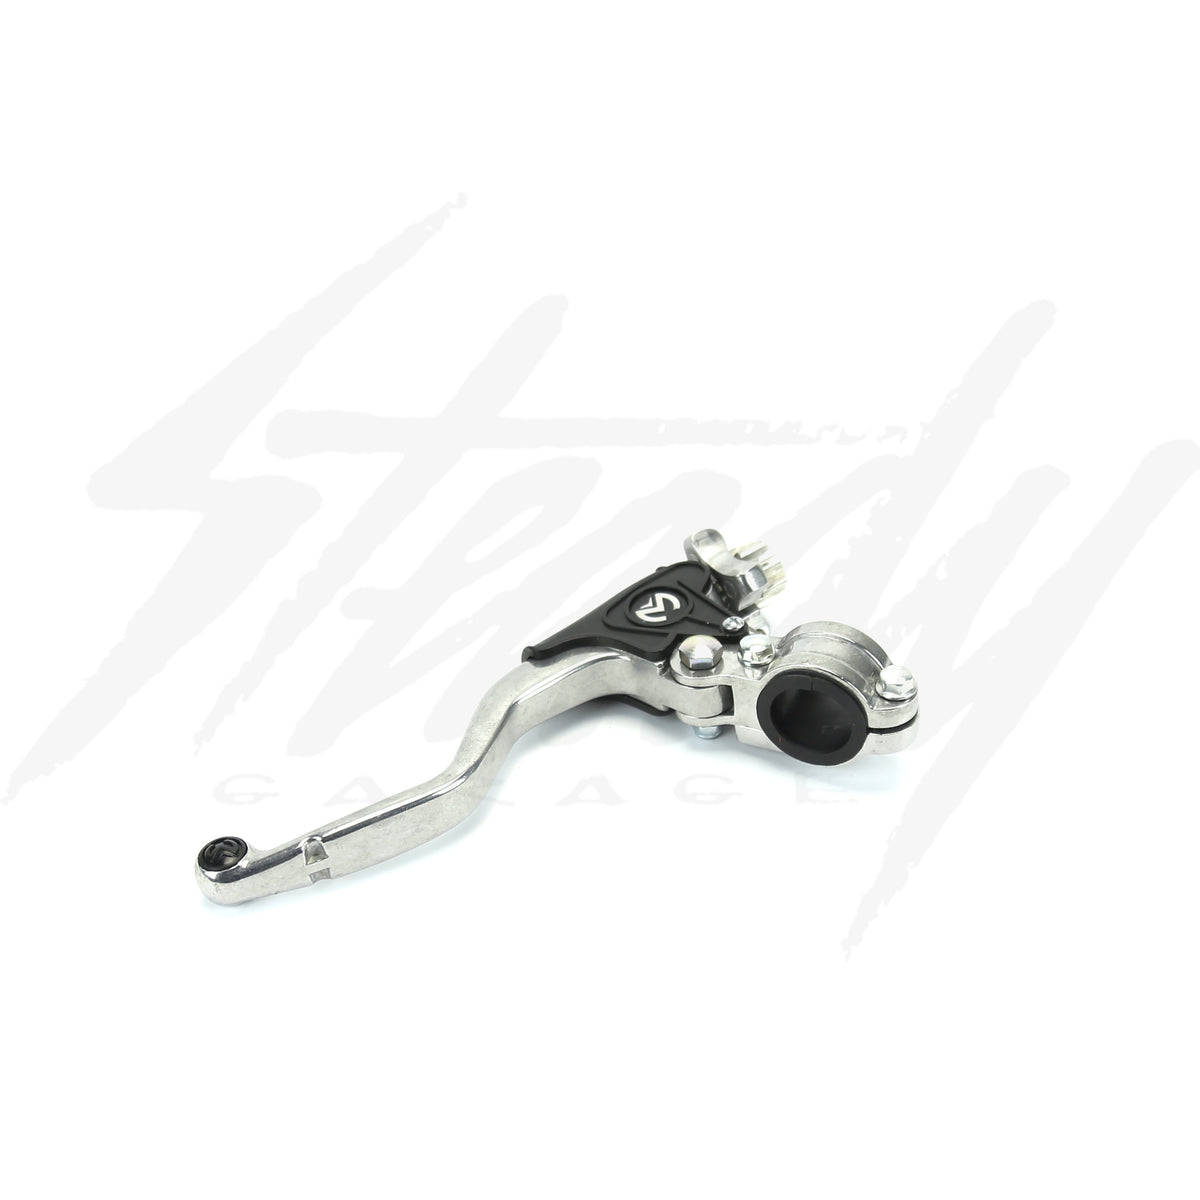 Moose Racing EZ Pull Ultimate Clutch Lever Assembly Honda Grom 125